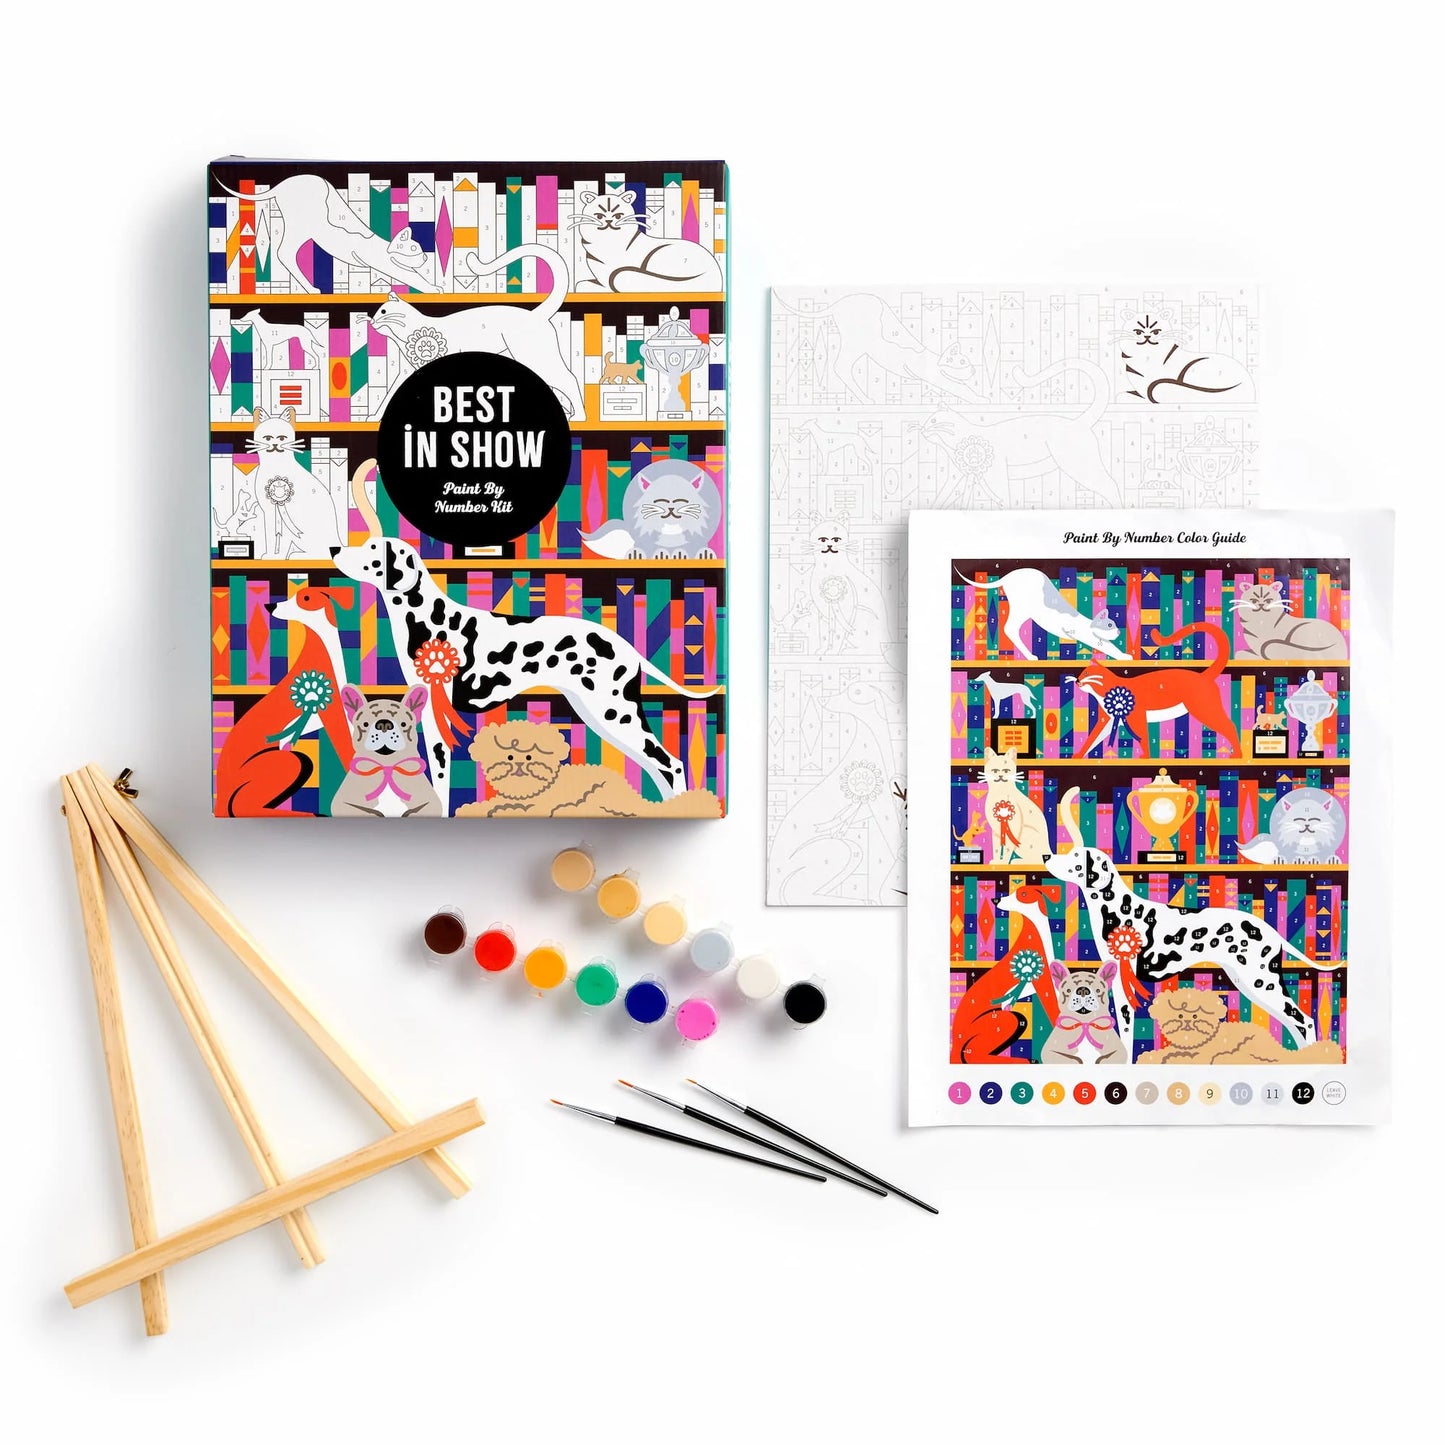 Paint by Numbers Kit - Best in Show